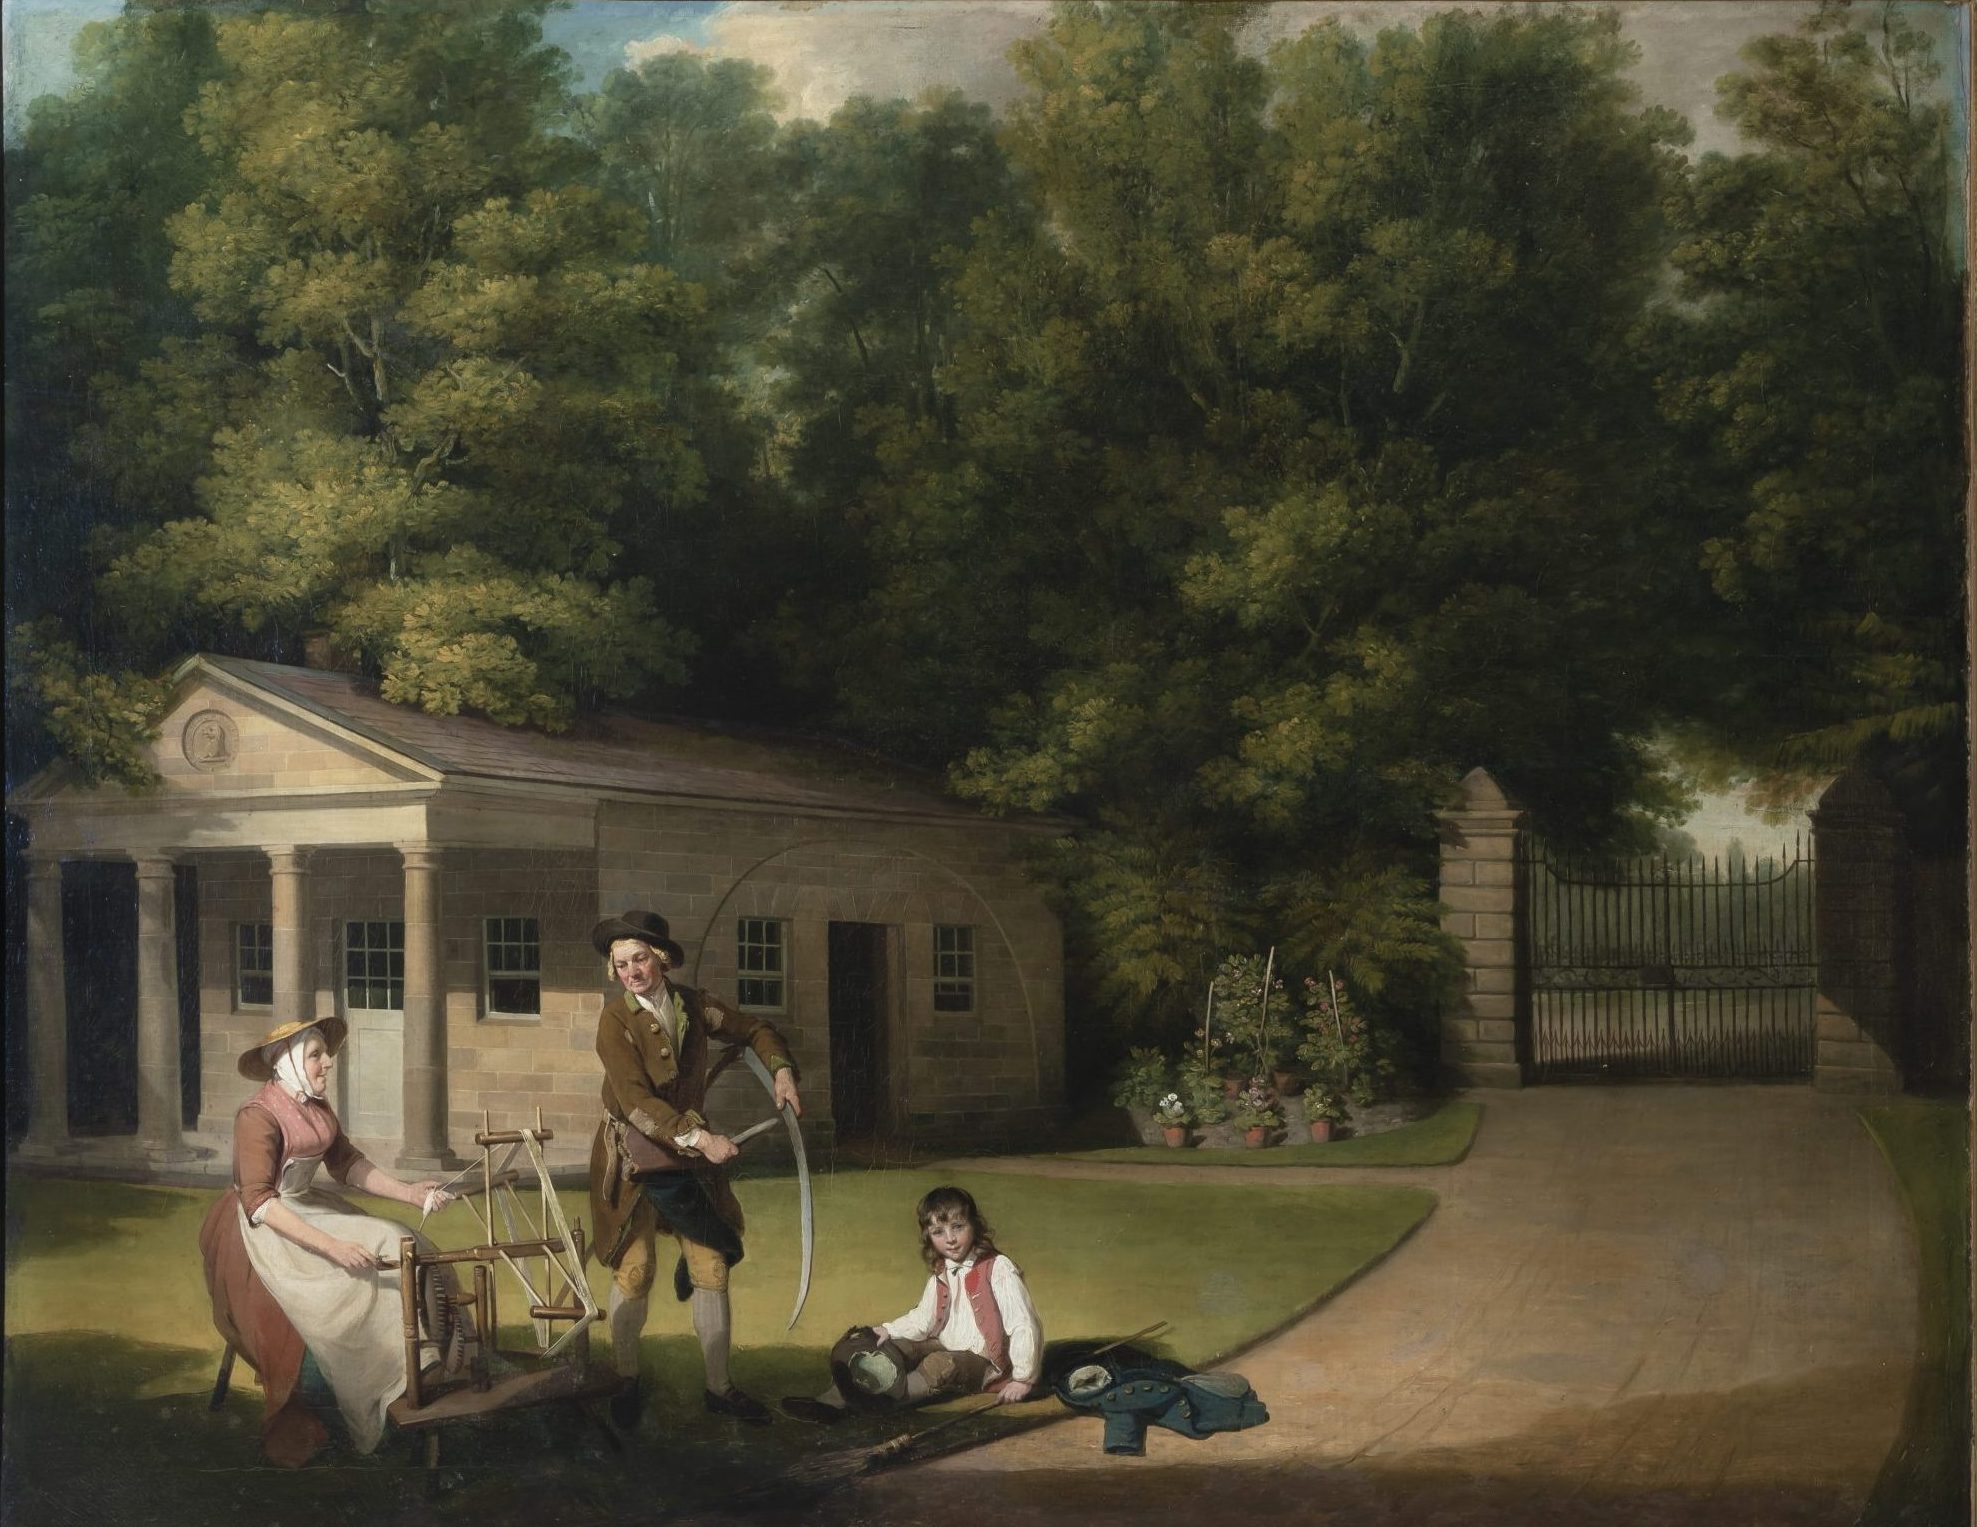 a painting of a man, woman and boy at work in an enclosure of a country house, with a small classical building behind them